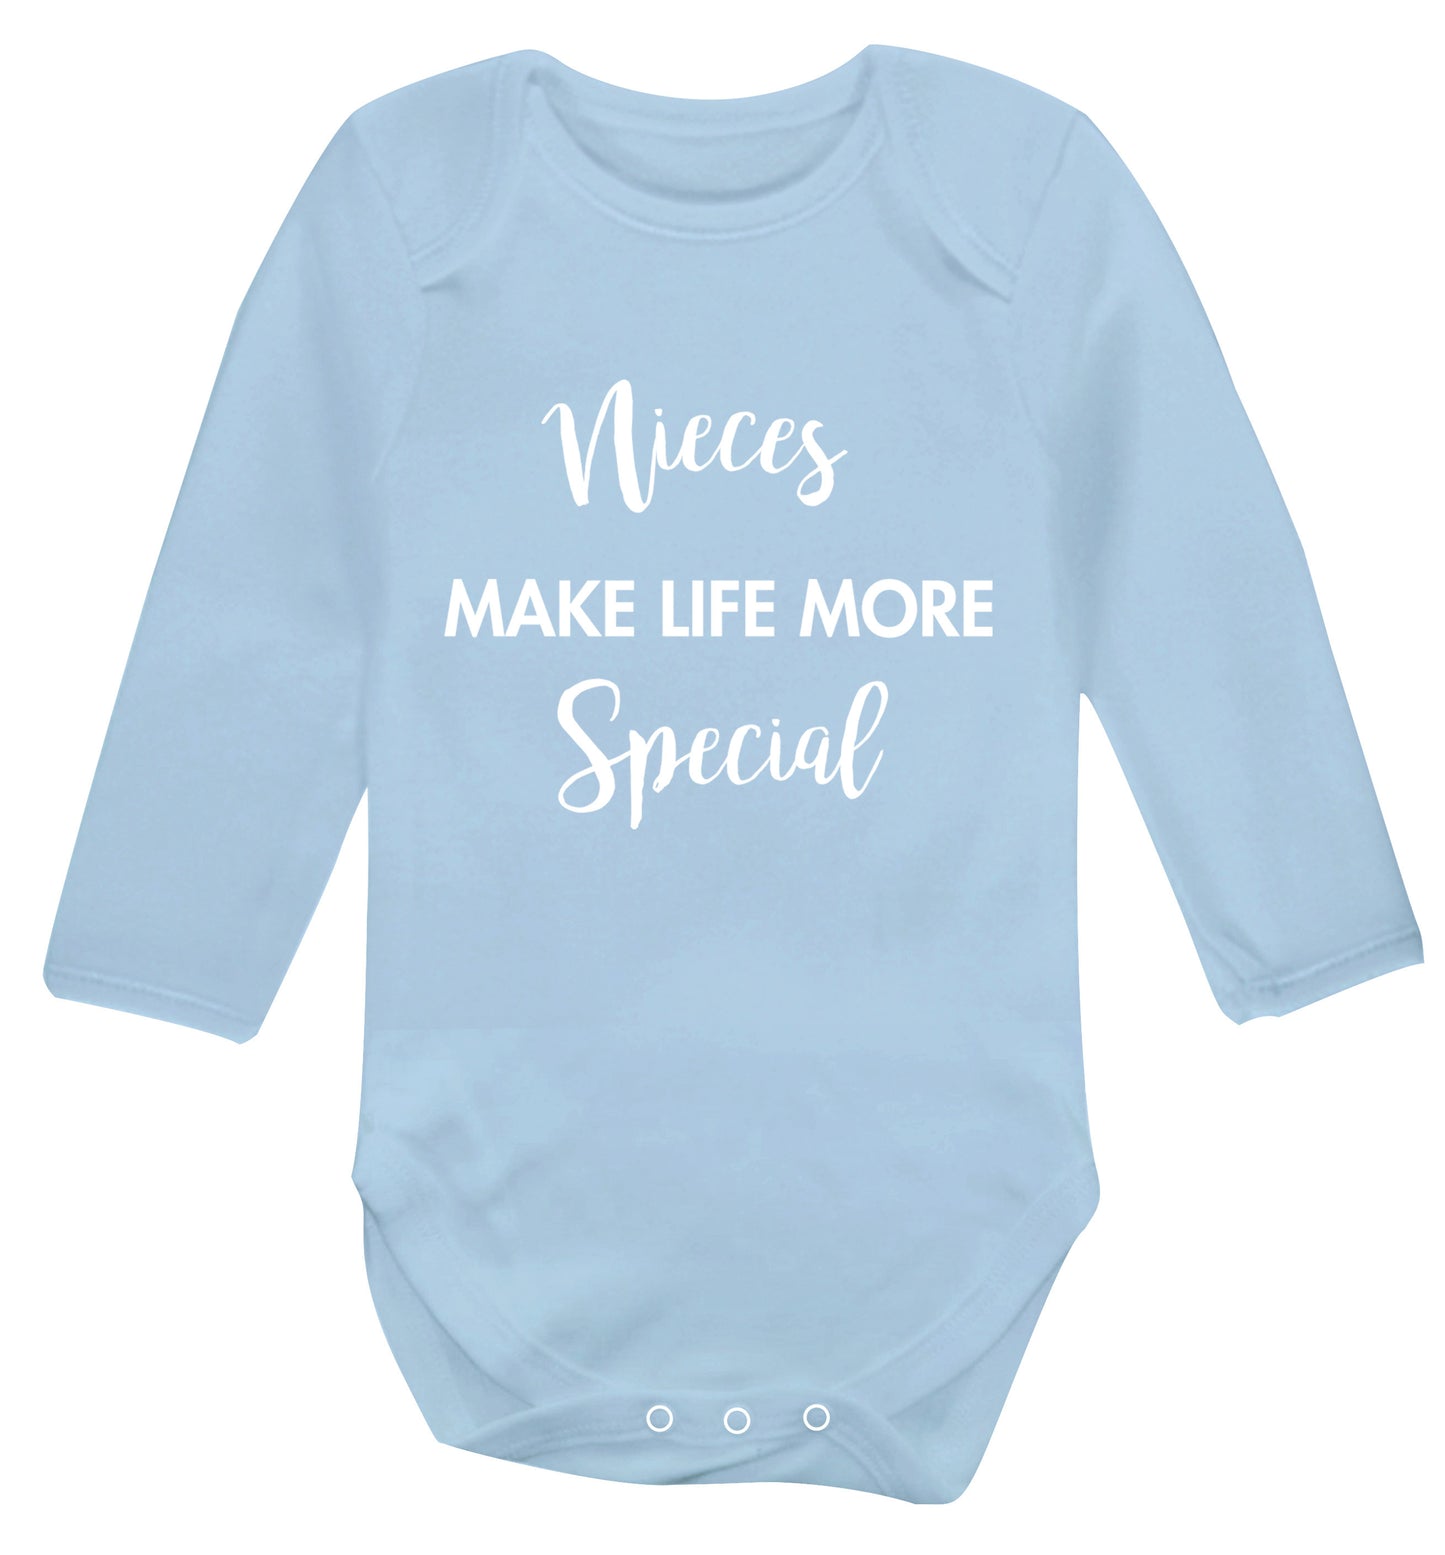 Nieces make life more special Baby Vest long sleeved pale blue 6-12 months